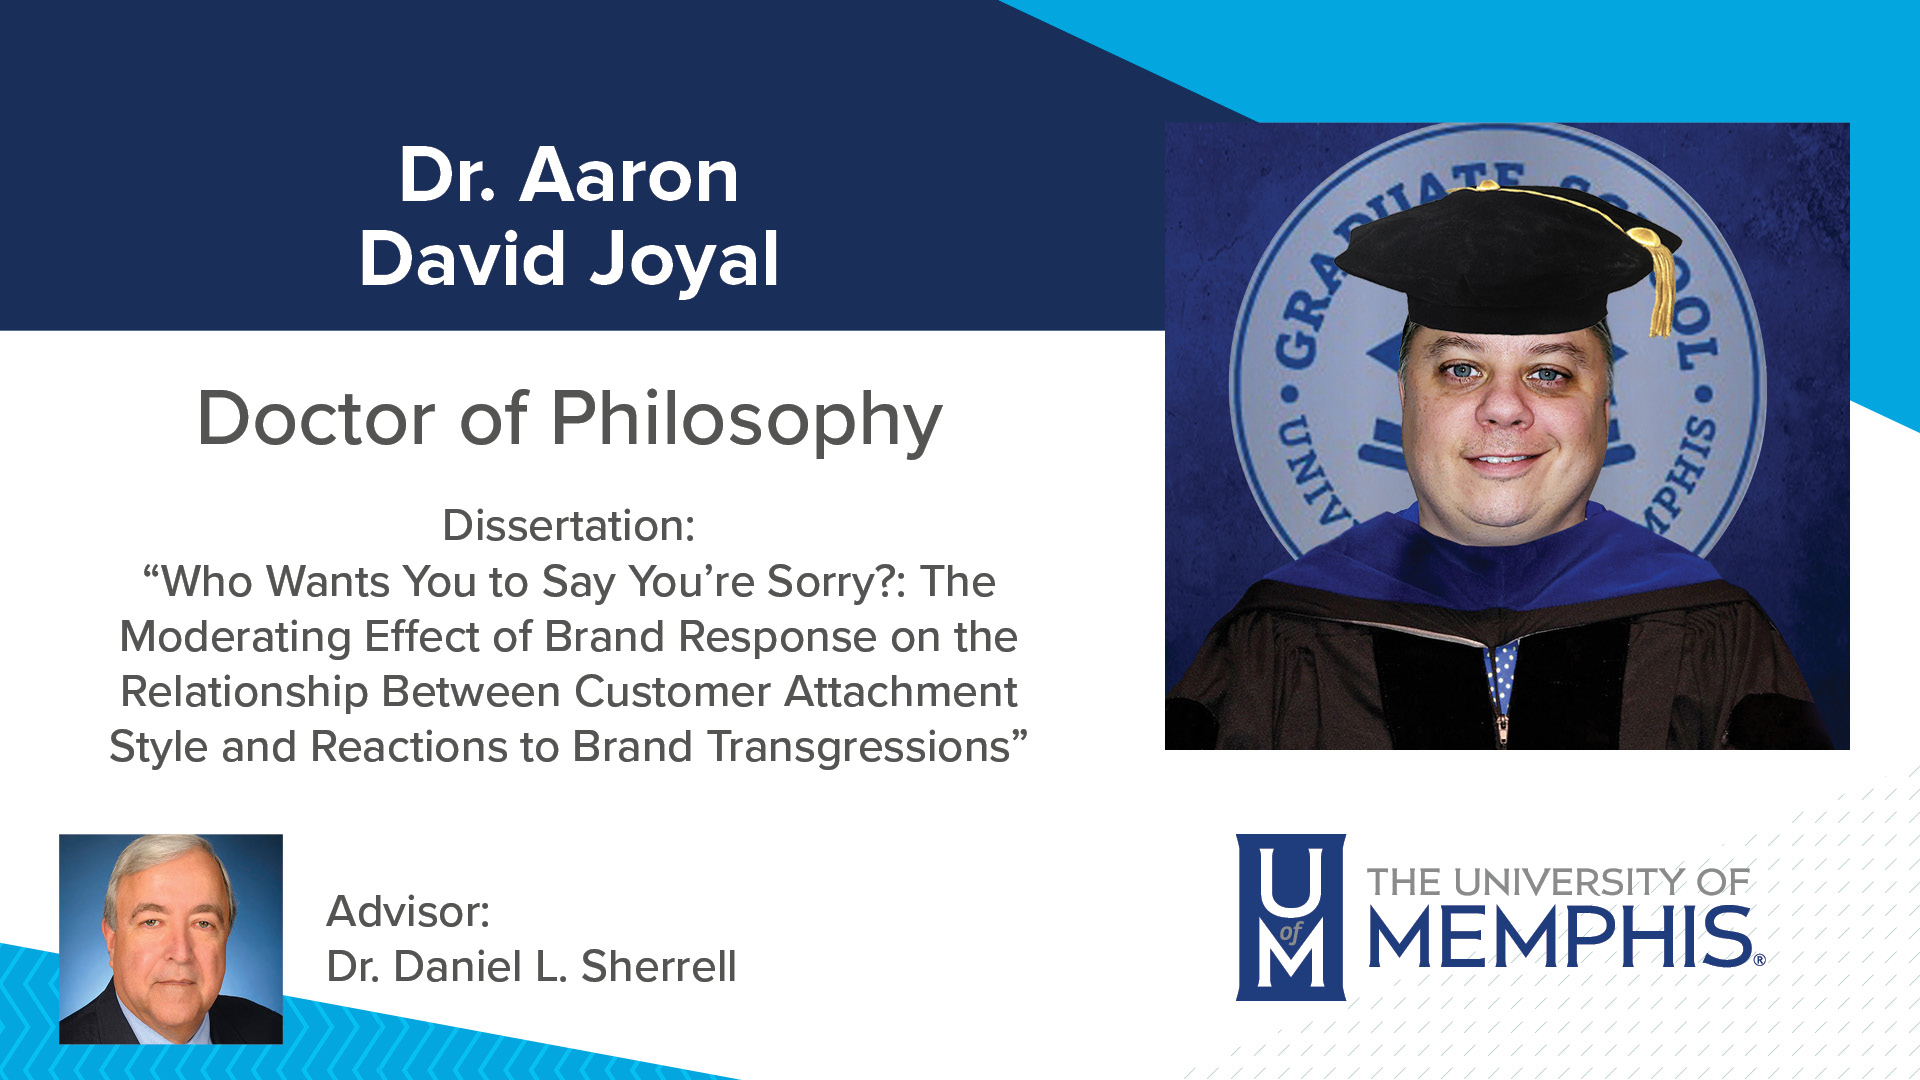 Dr. Aaron David Joyal Dissertation: “Who Wants You To Say You’re Sorry?: The Moderating Effect Of Brand Response On The Relationship Between Customer Attachment Style And Reactions To Brand Transgressions” Major Professor: Dr. Daniel L Sherrell